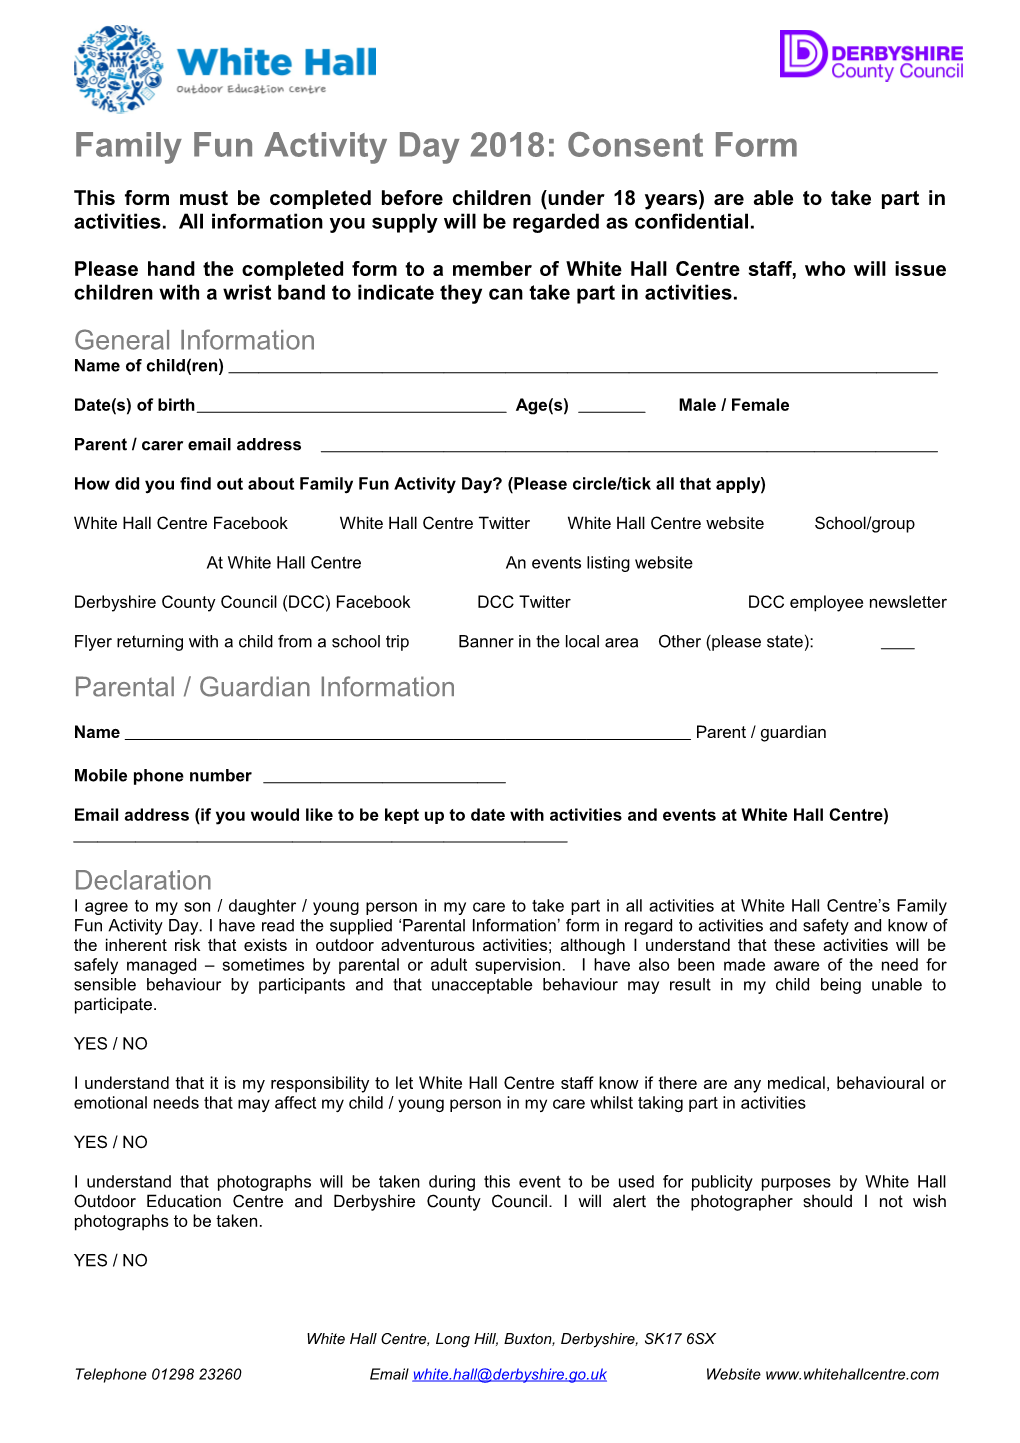 Family Fun Activity Day 2018: Consent Form